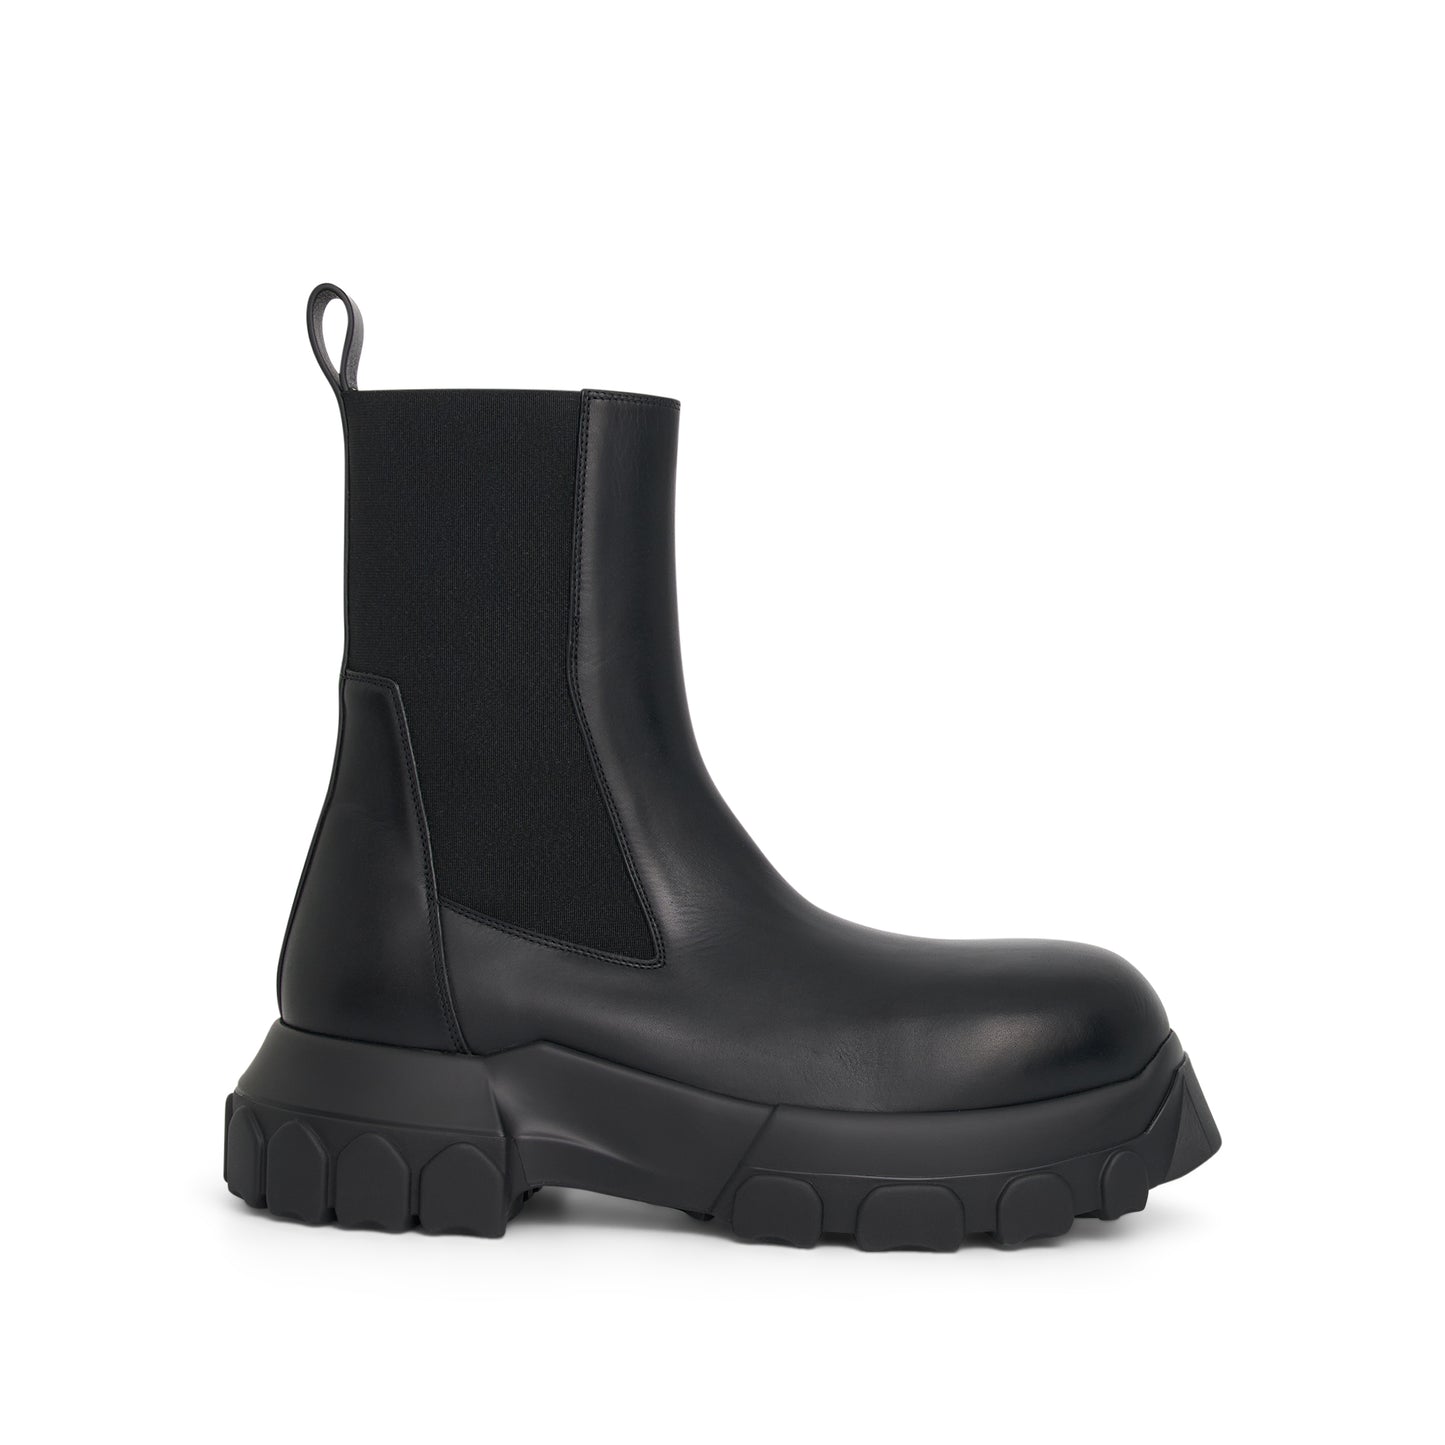 Washed Calf Beatle Bozo Tractor Boots in Black